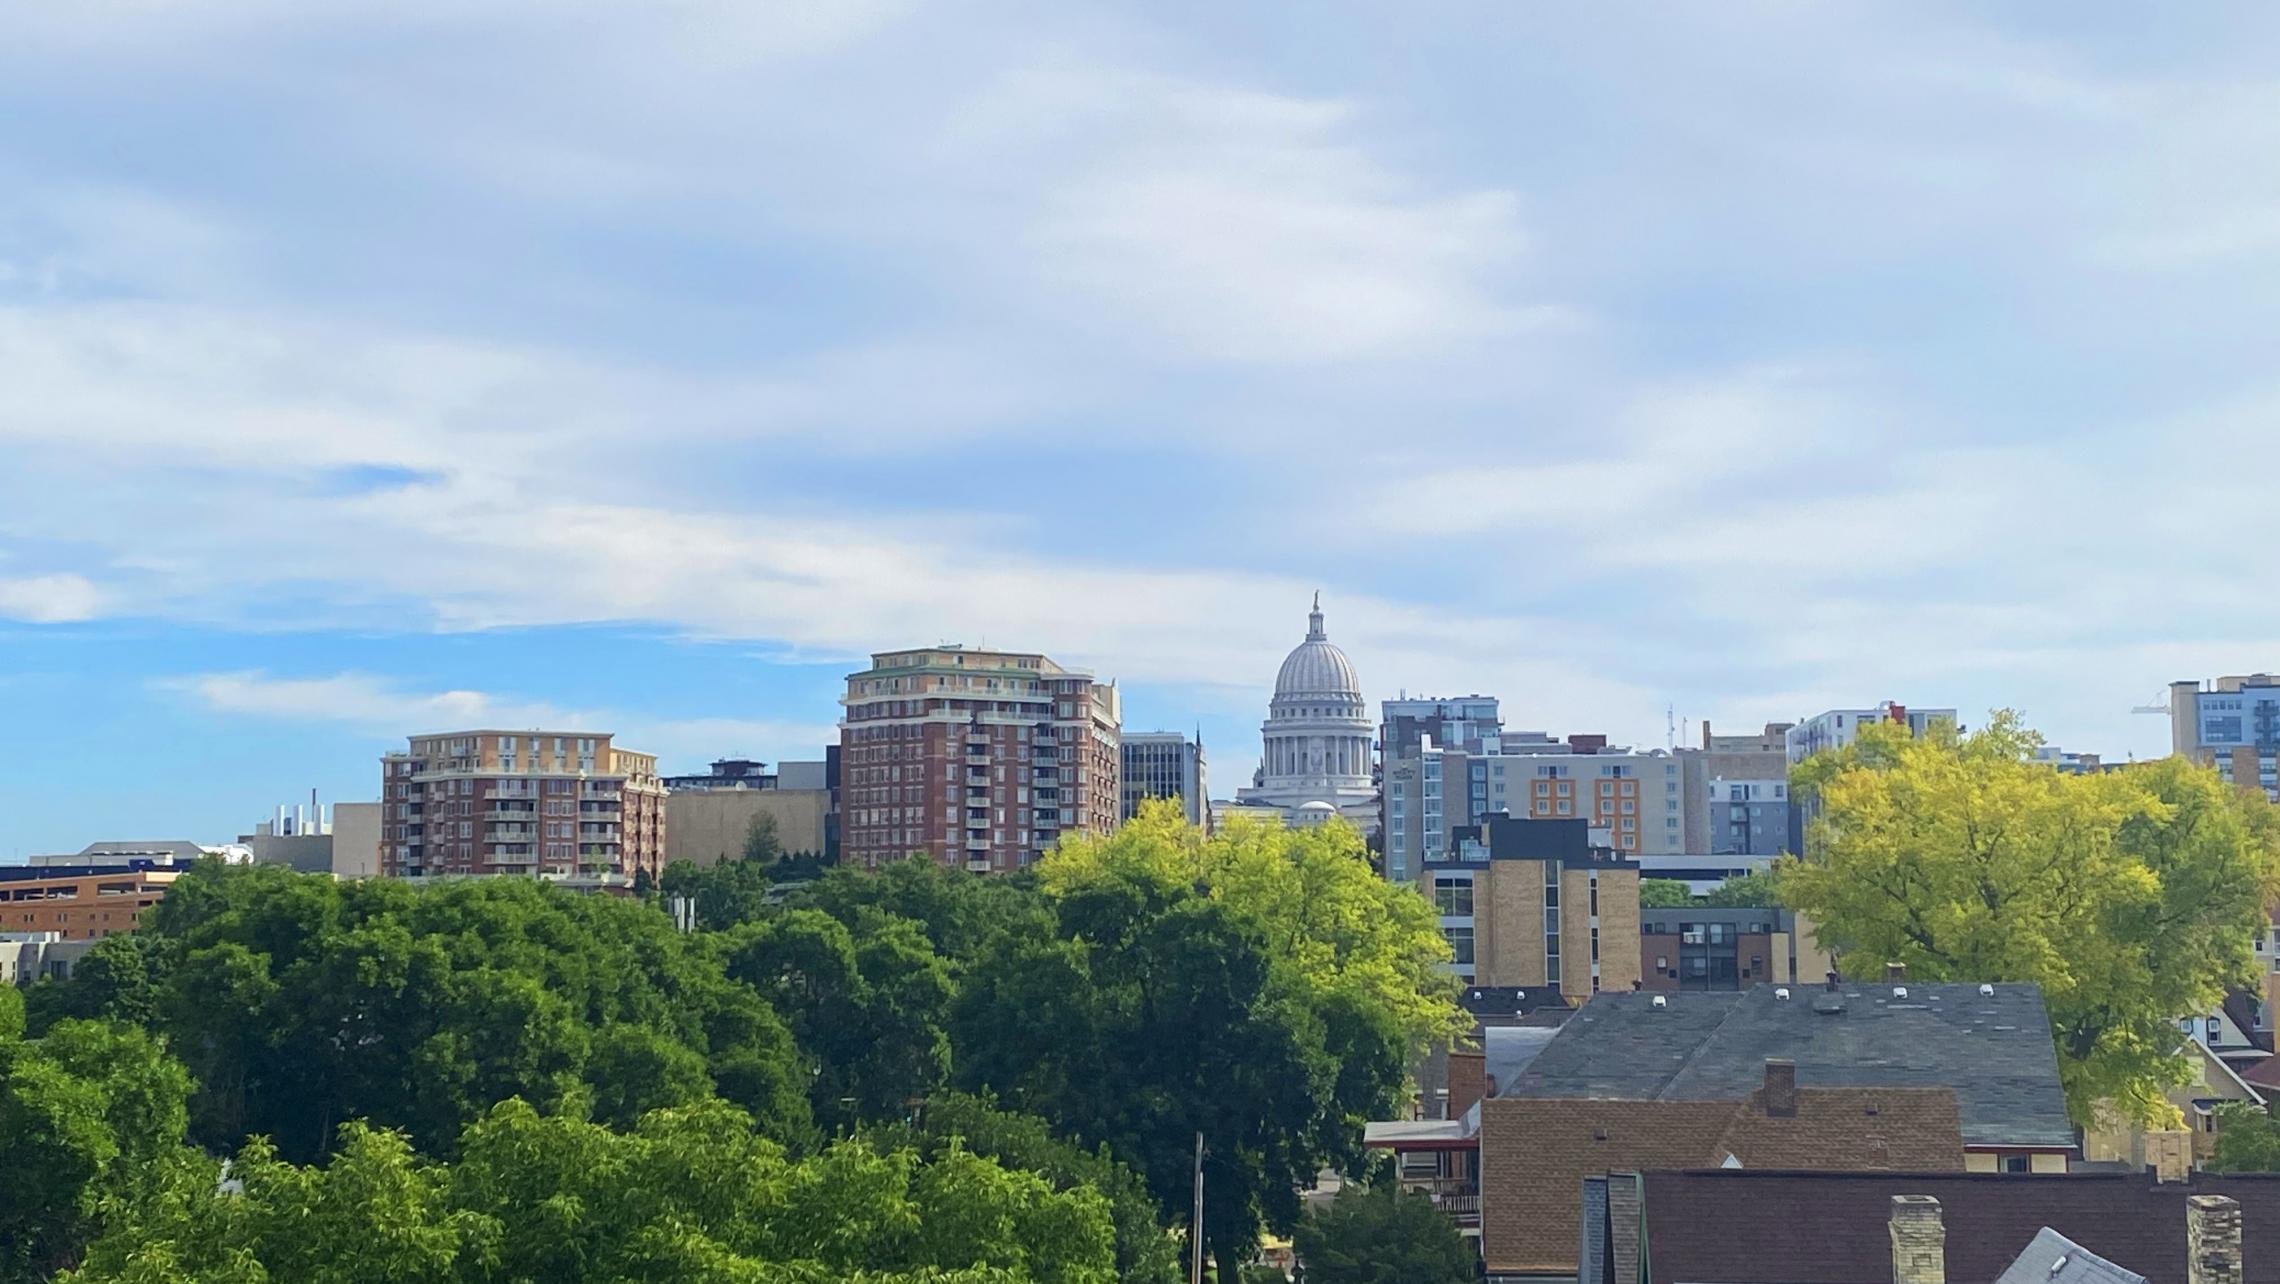  The-Depot-Apartments-1-505-Two-Bedroom-Den-Top-Floor-Capitol-View-Downtown-Madison-Fitness-Terrace-Balcony-Lifestyle-Bike-Path